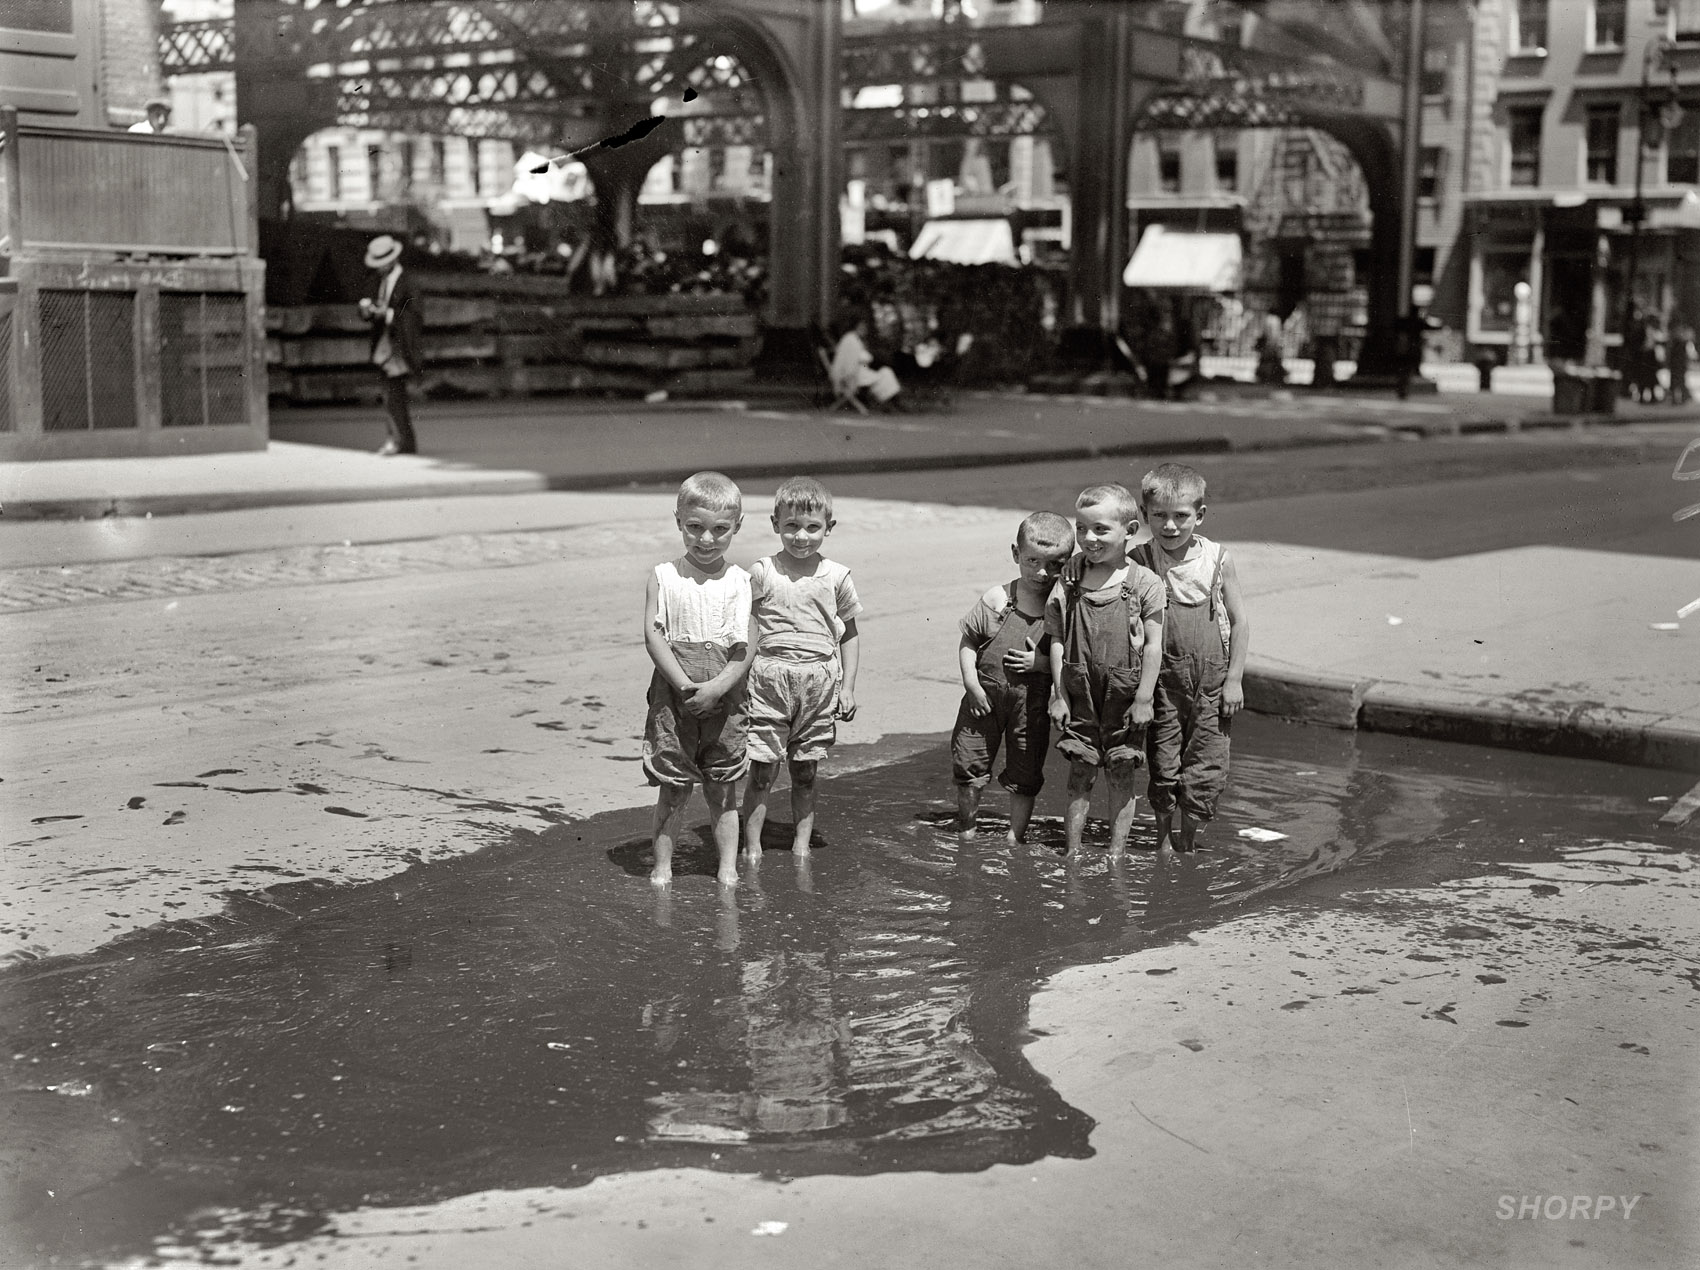 New York City, July 31, 1913. "Children at Play." 5x7 glass negative, George Grantham Bain Collection, Library of Congress. View full size.